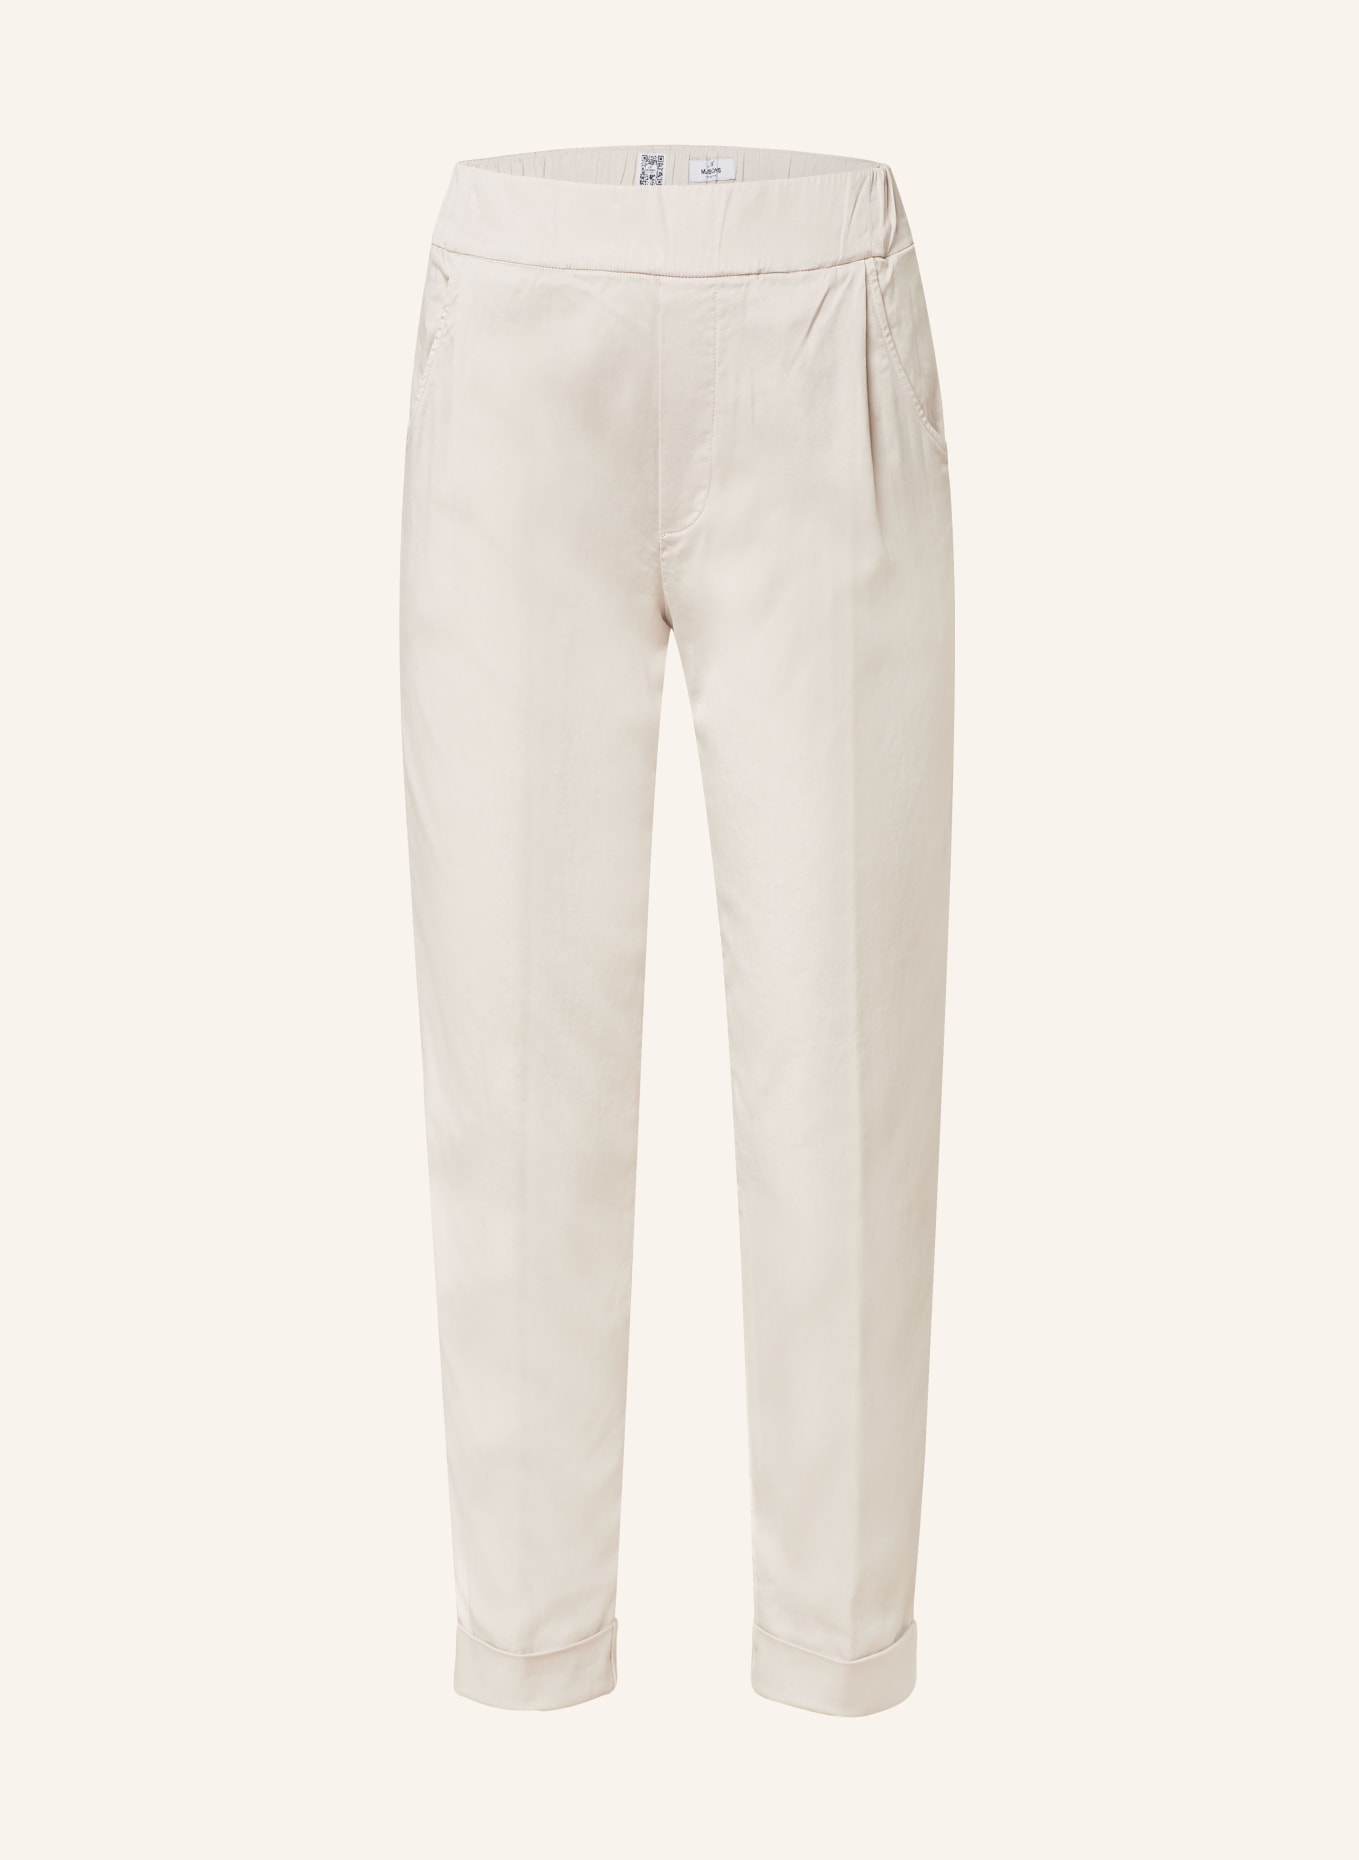 MASON'S Trousers EASY JOGGER in jogger style, Color: CREAM (Image 1)